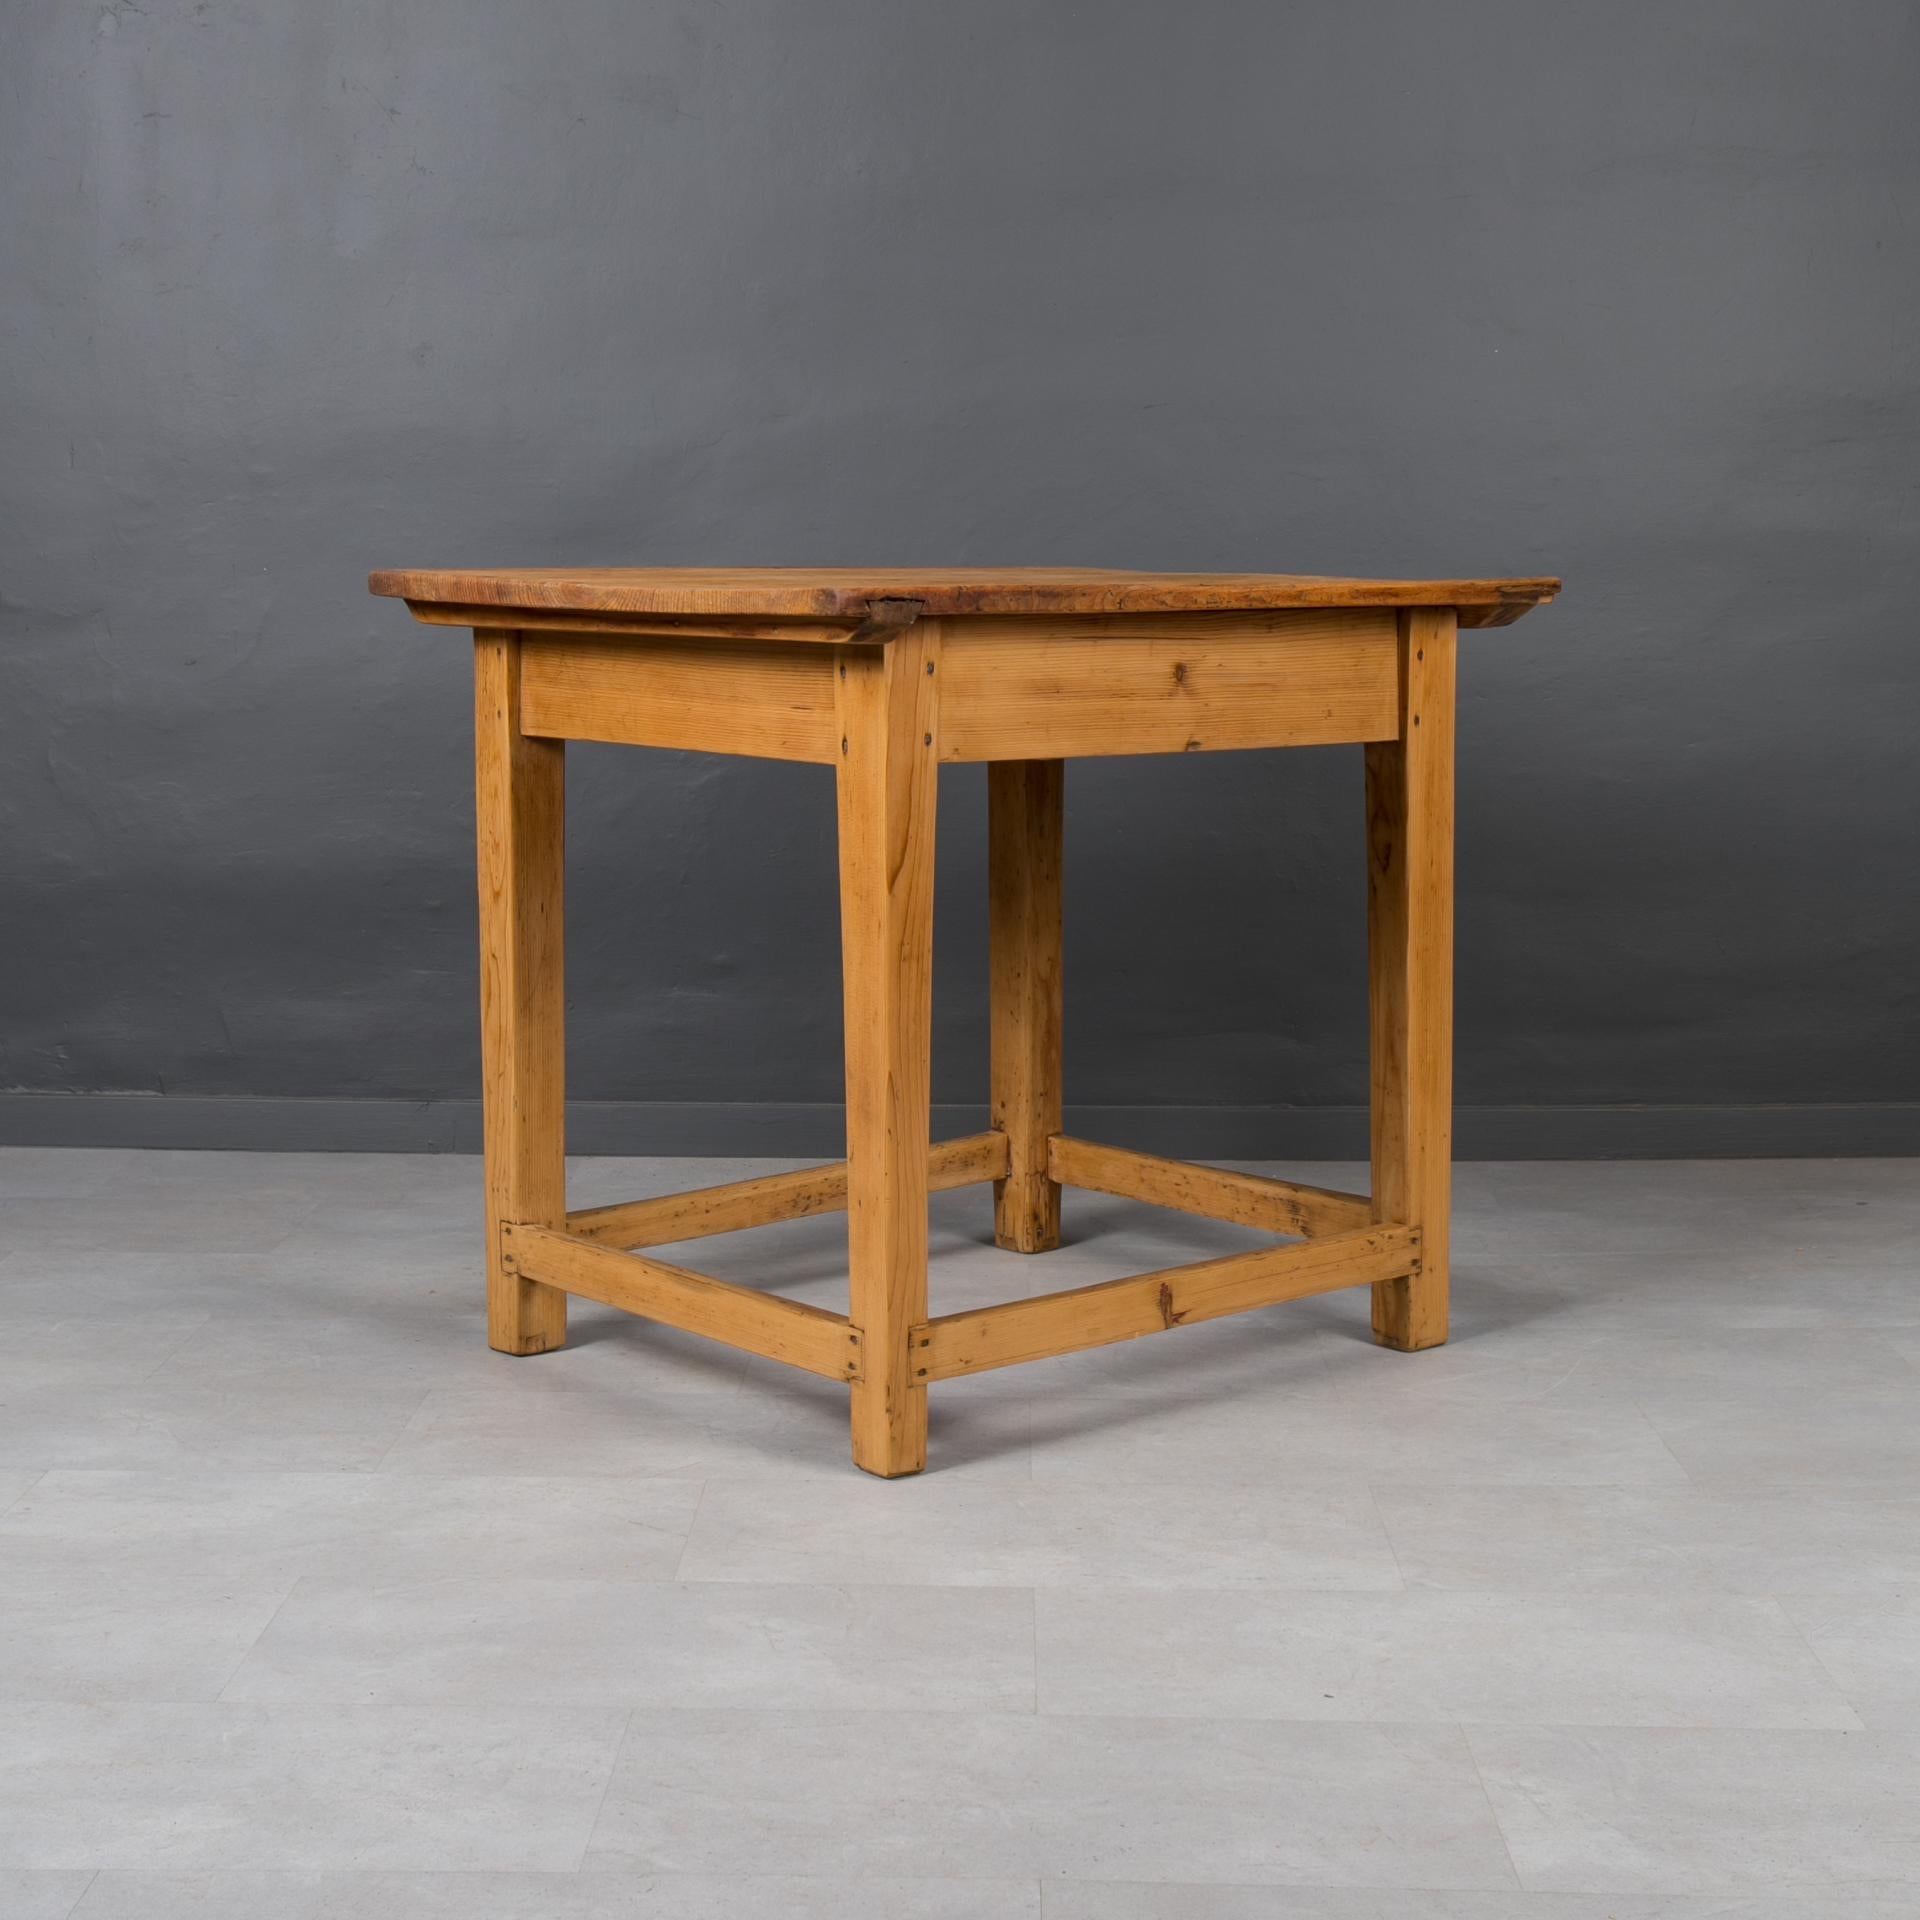 19th Century Vintage Pine Wood Table, Rustic Style, Prep or Dining Table, Kitchen Island For Sale